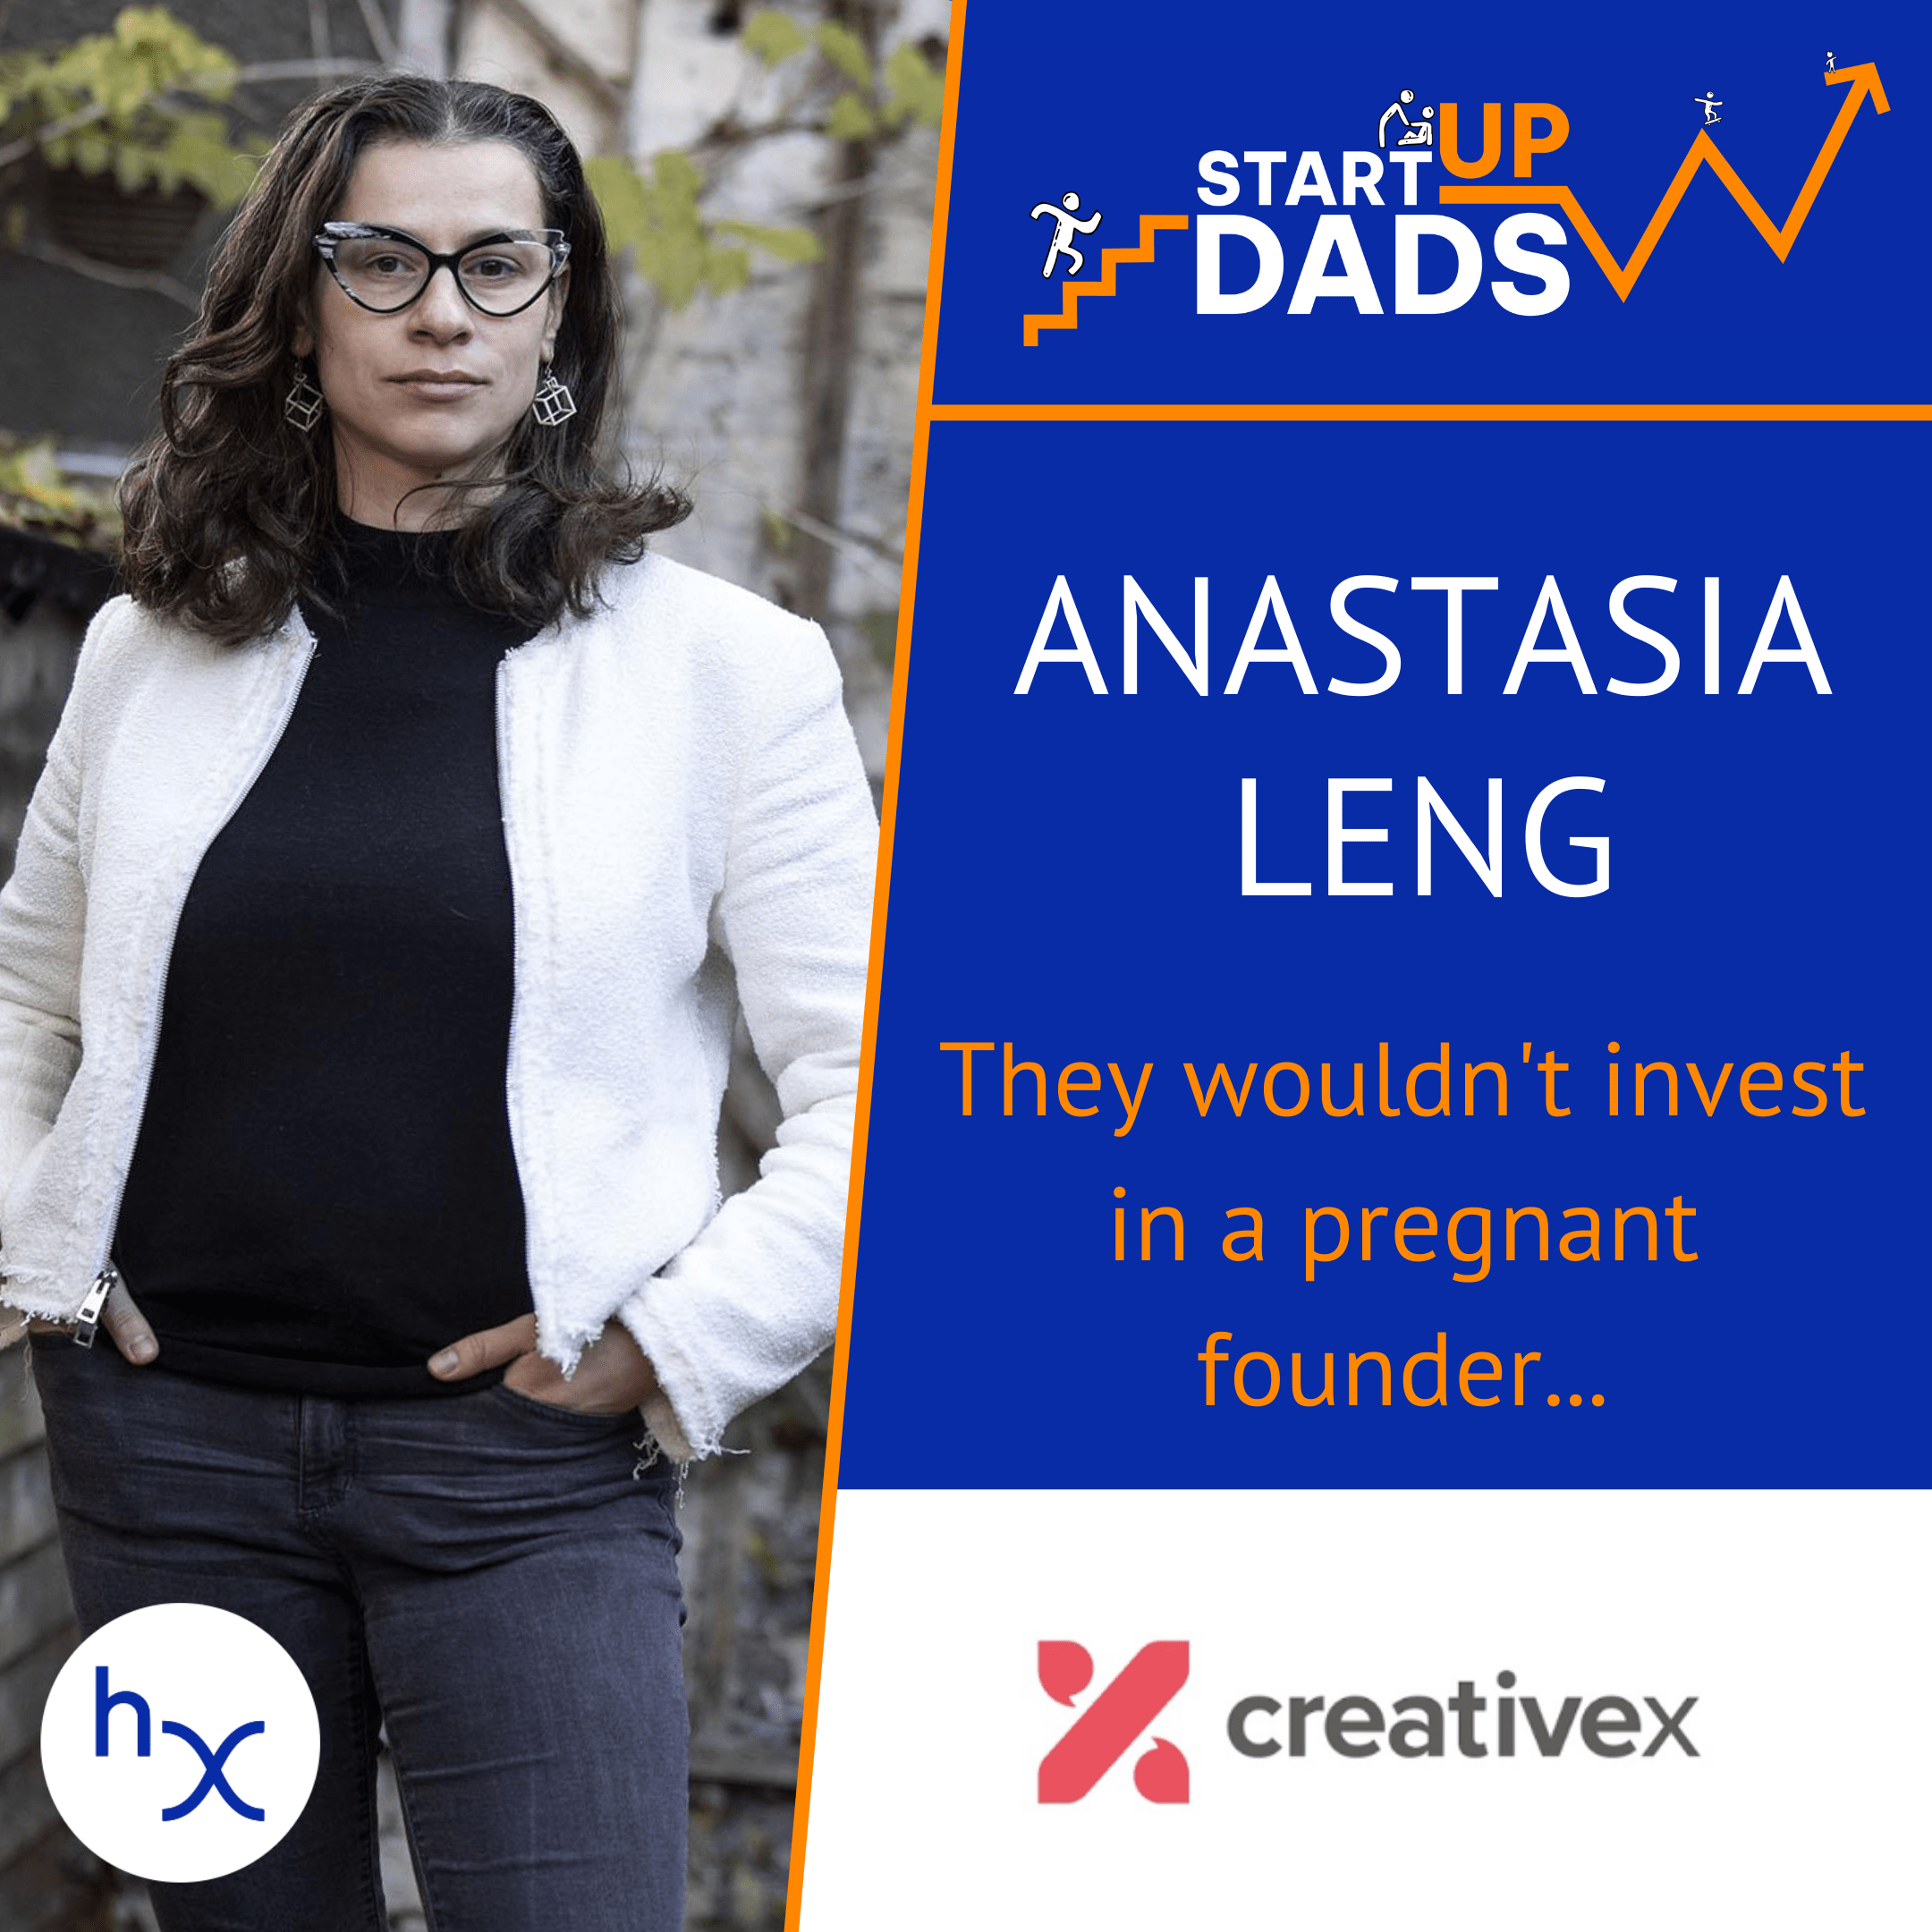 They wouldn't invest in a pregnant founder...